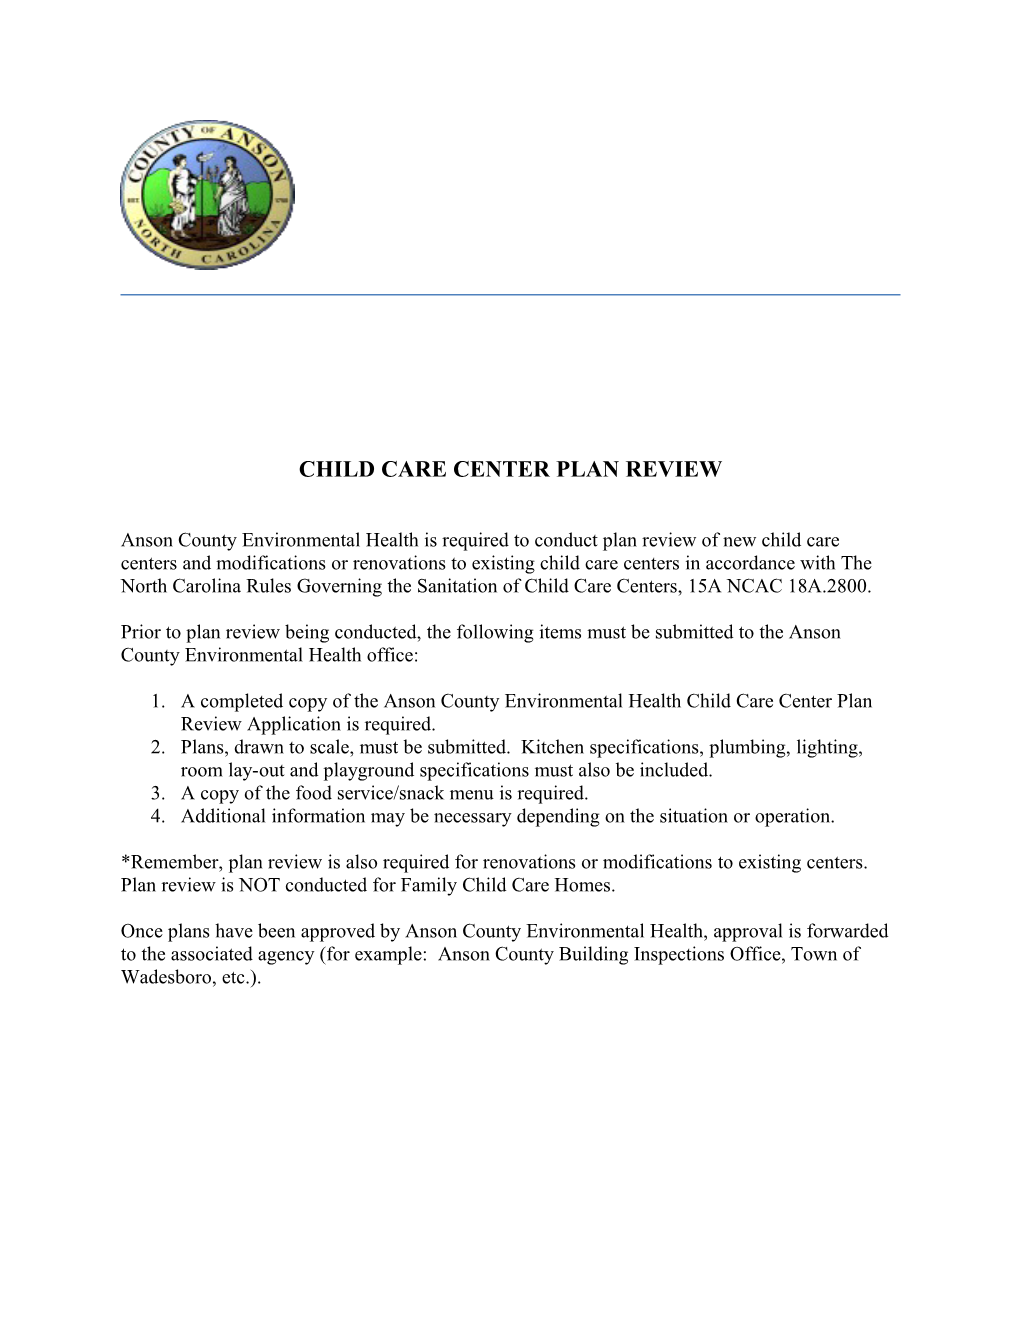 Child Care Center Plan Review